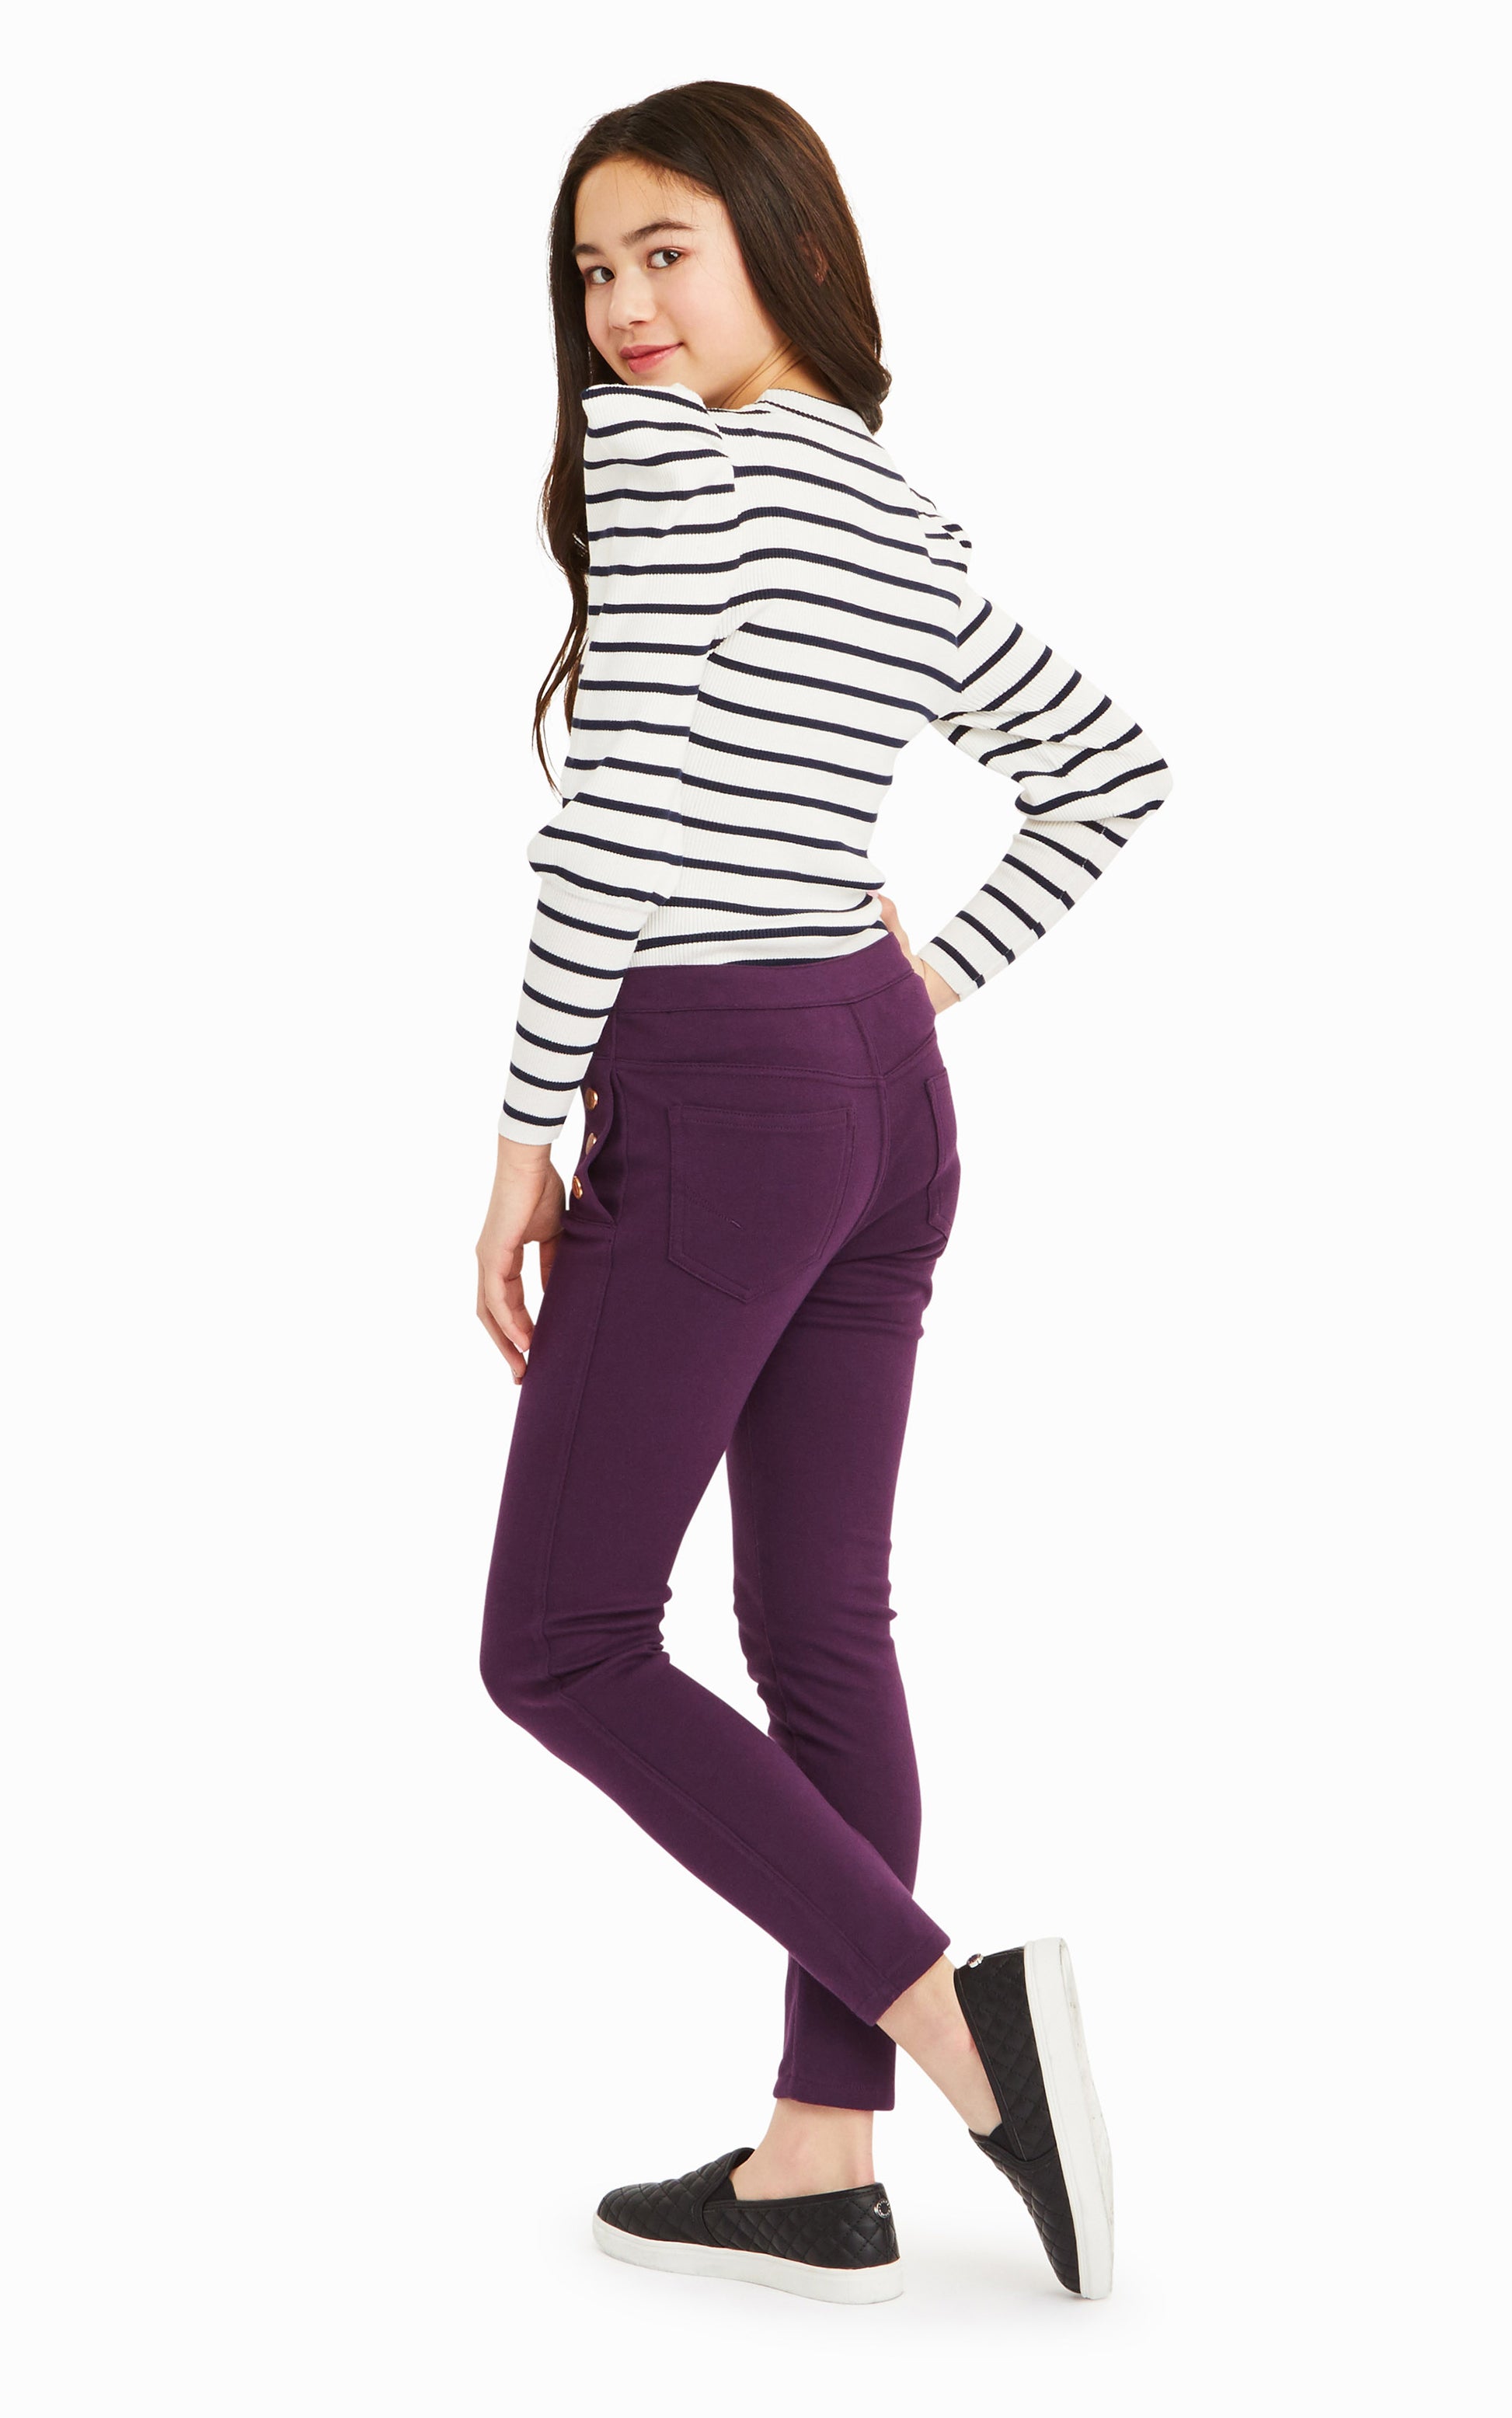 Back view of girl wearing white and black-striped long-sleeve top with purple snap-front pants.